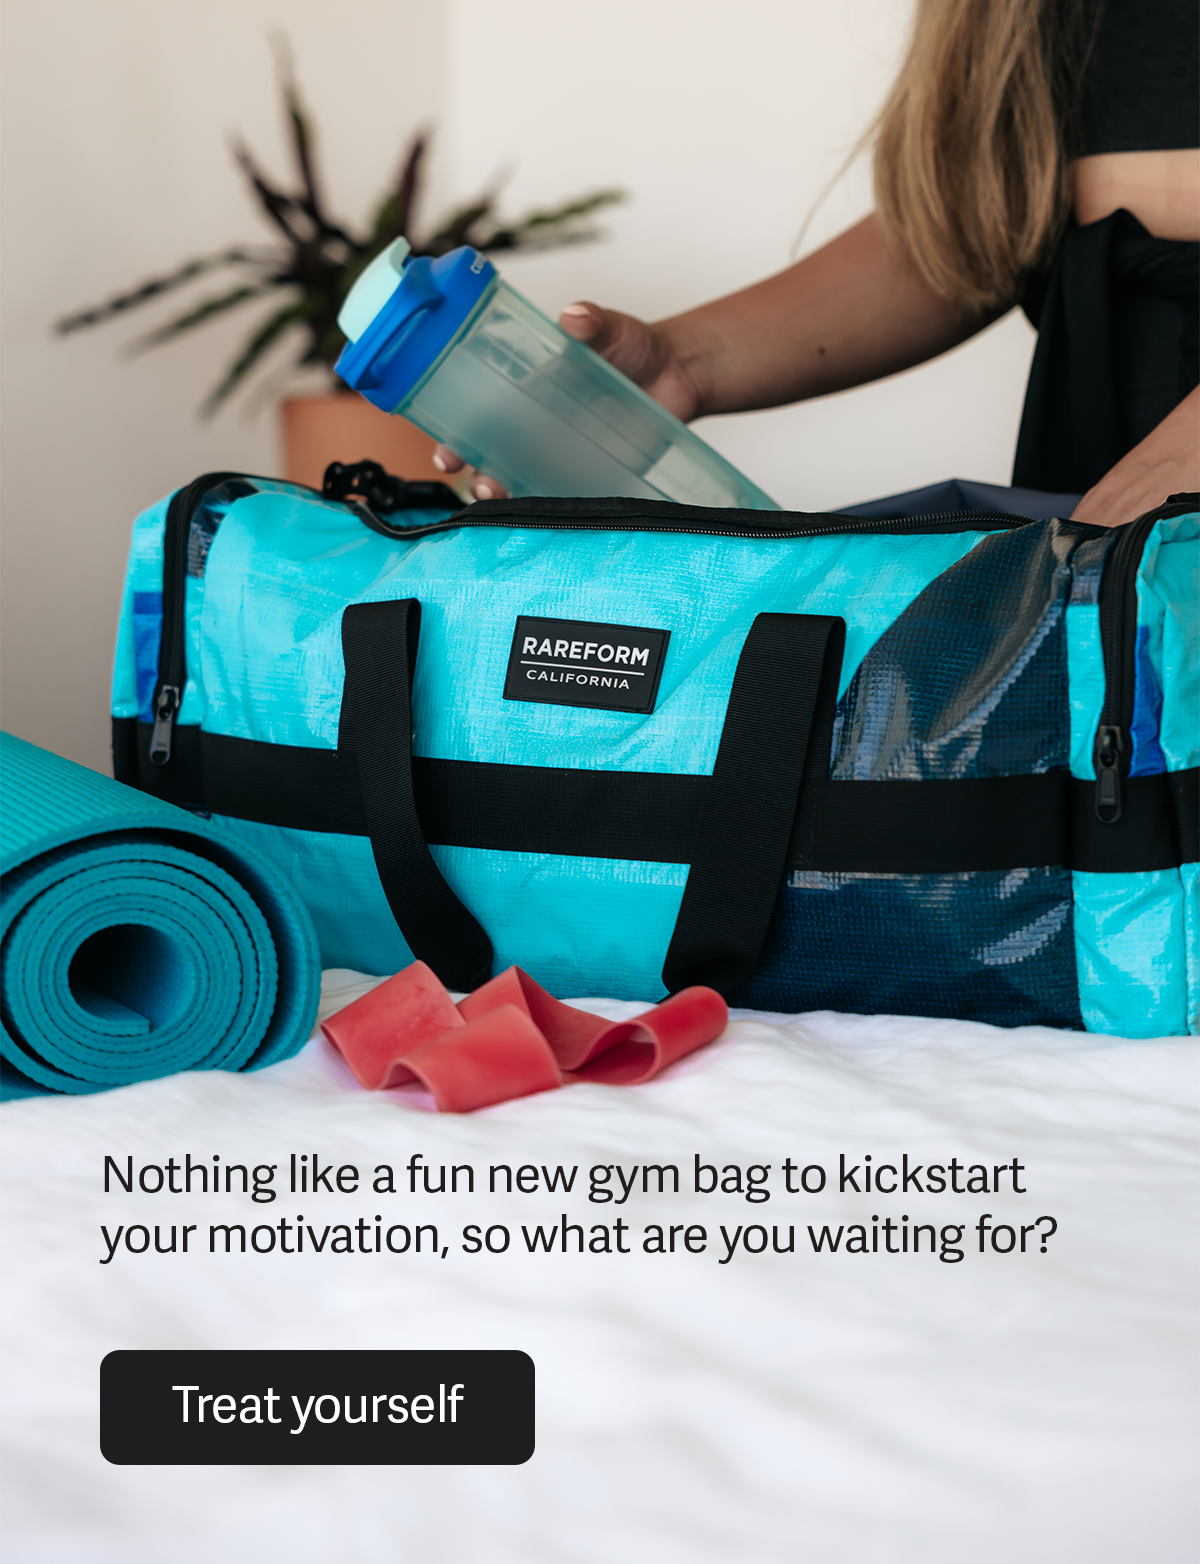 Nothing like a fun new gym bag to kickstart your motivation. So, what are you waiting for?